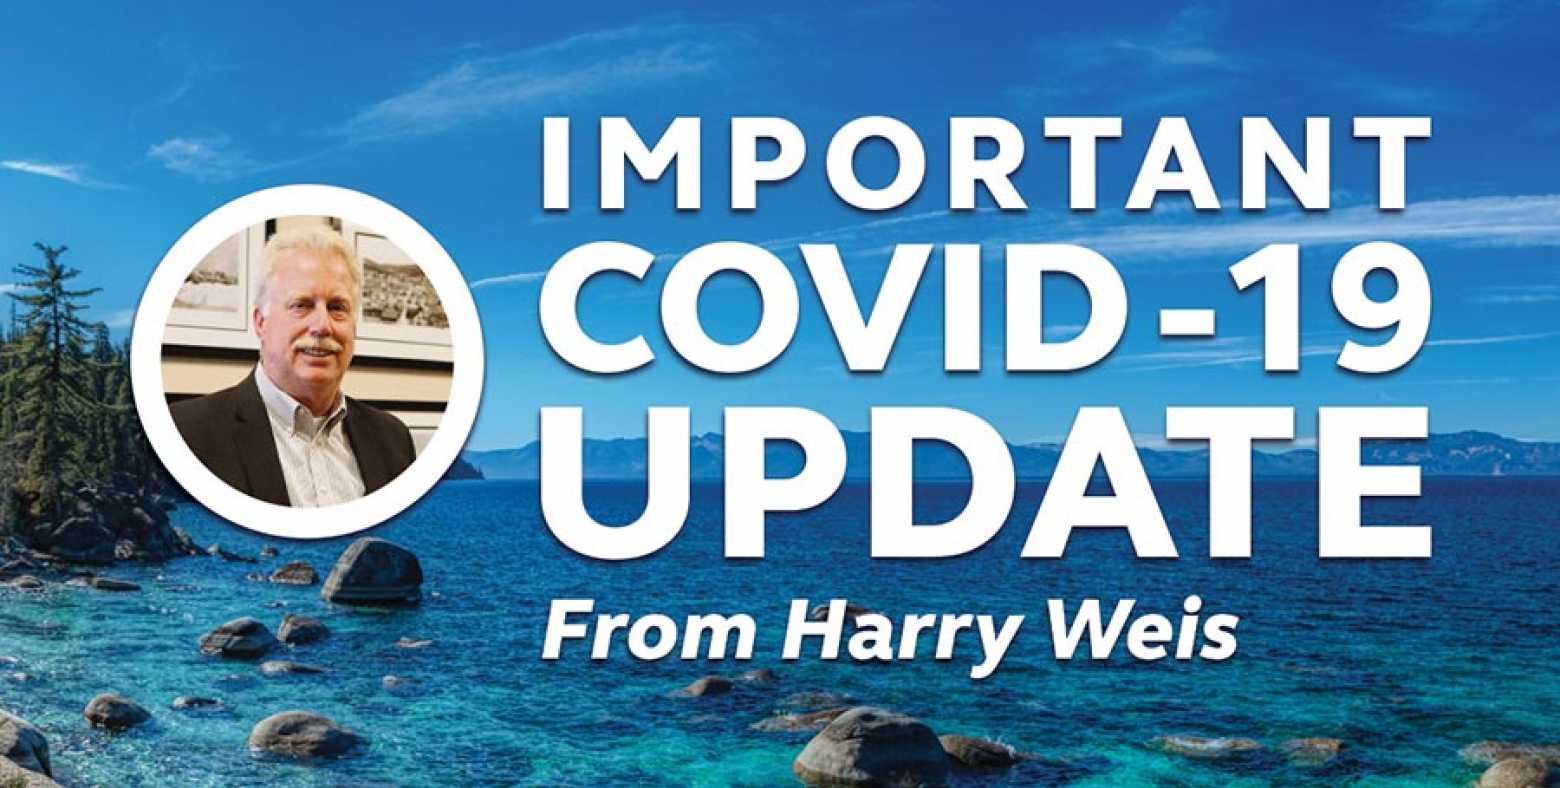 Important COVID-19 Update from Harry Weis, with photo of Harry Weis and Lake Tahoe in background